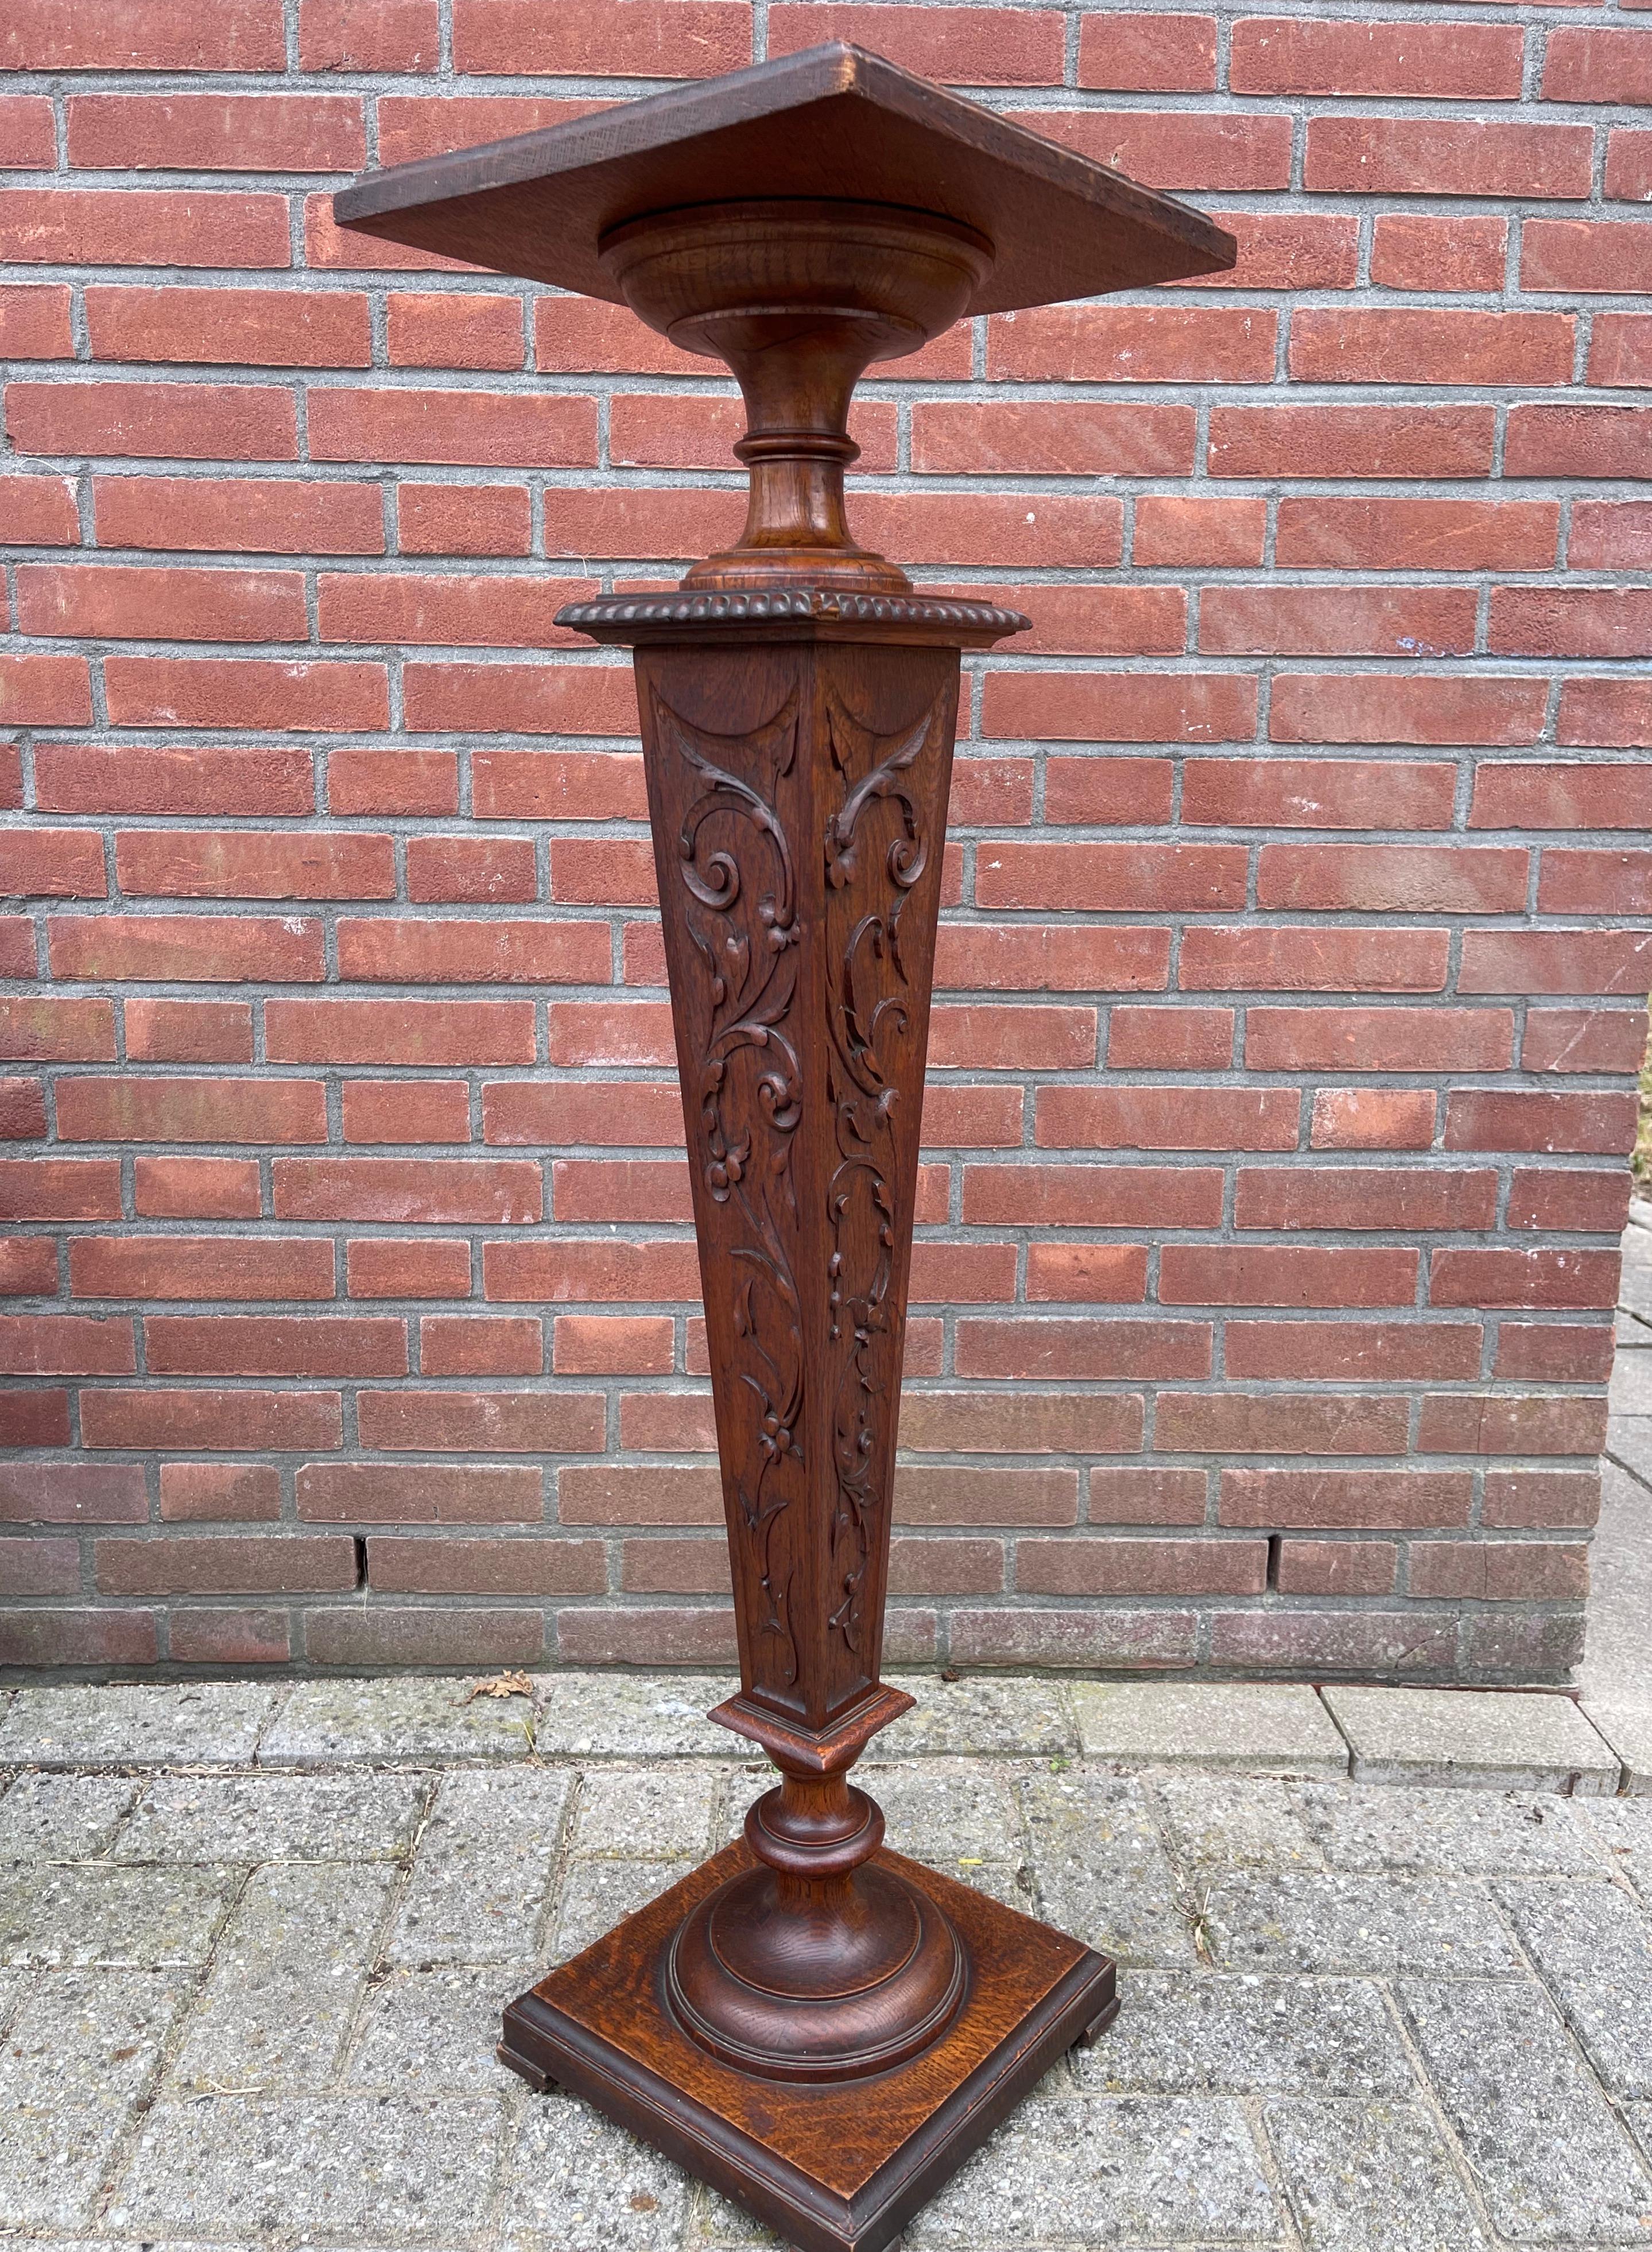 Stunning display column with a warm and beautiful patina.

If you are looking for an antique column pedestal for displaying a vase, a plant, a sculpture or another work of art then this remarkably stylish, well designed and very well executed